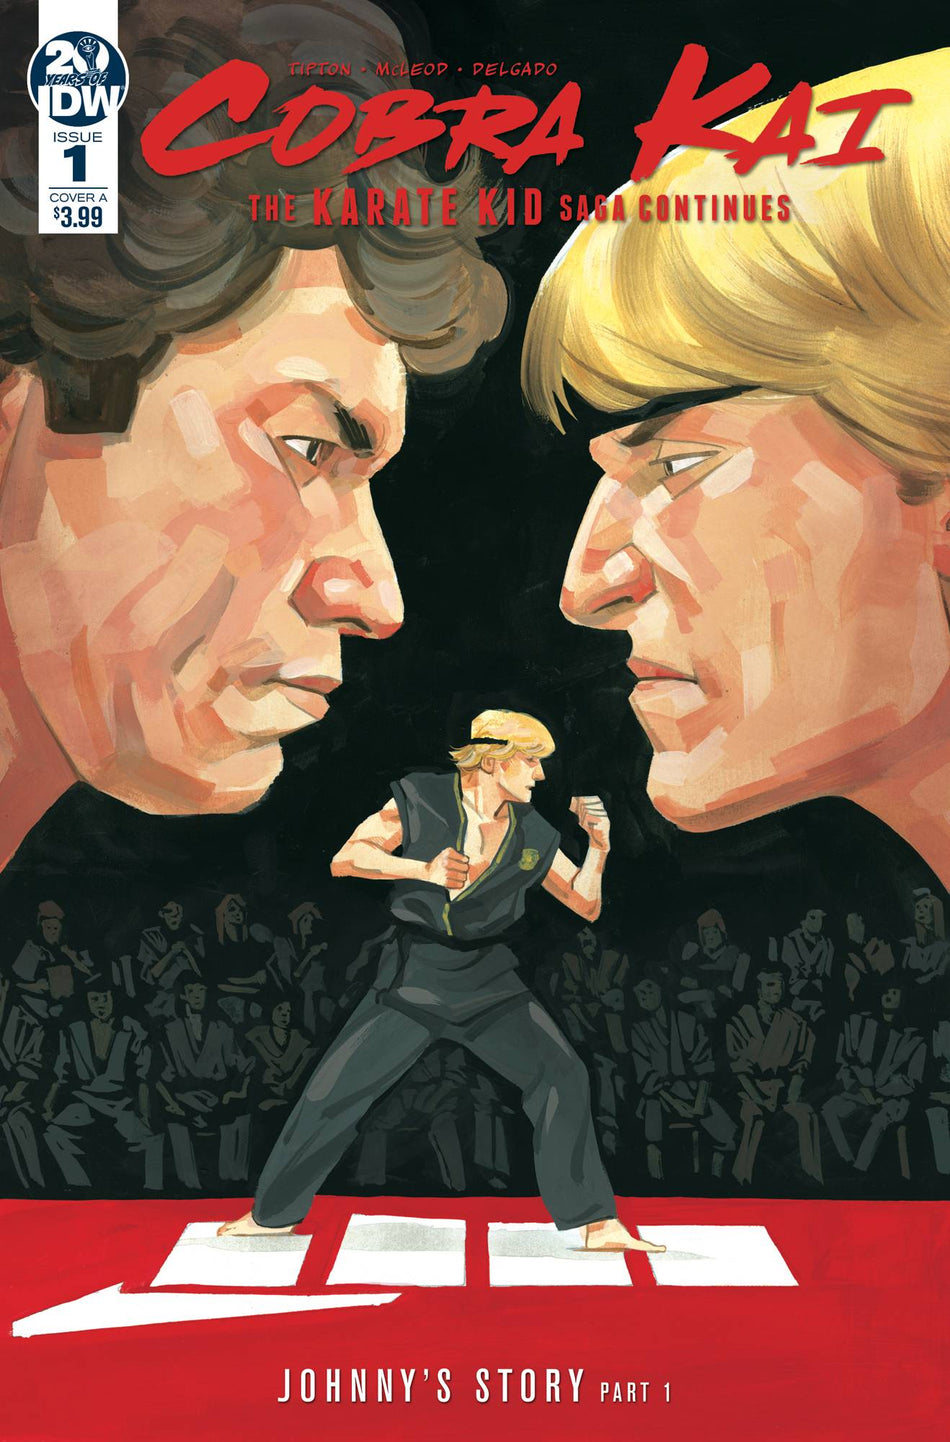 Photo of Cobra Kai Karate Kid Saga Continues Issue 1 (of 4) CVR A McLeod comic sold by Stronghold Collectibles